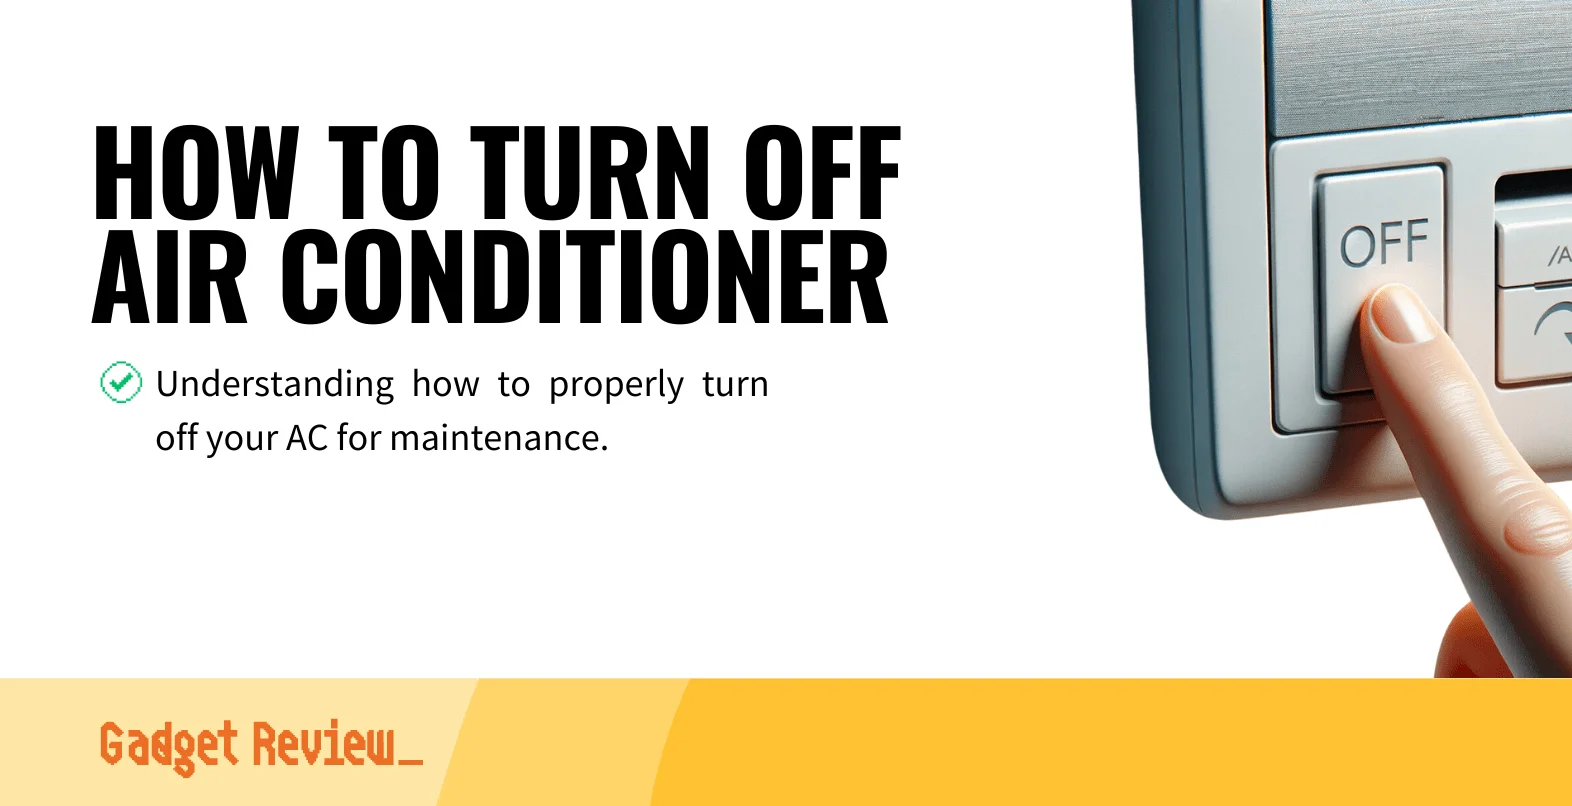 How to Turn Off an Air Conditioner